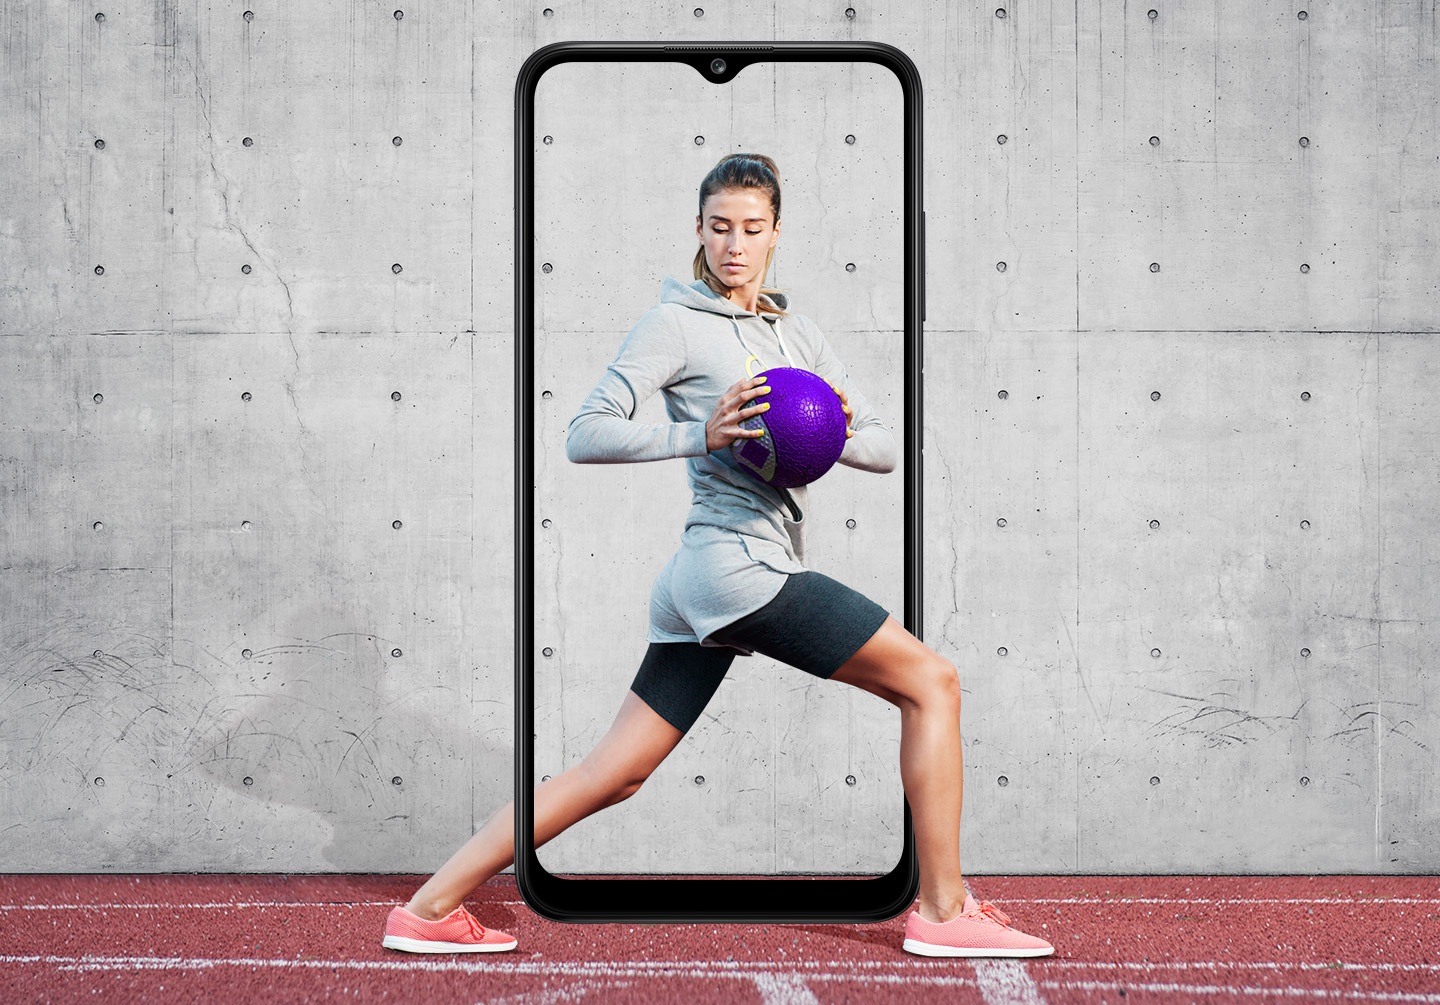 Compare the Samsung Galaxy A03s display specs now. Inside of the Galaxy A03s frame shows a woman performing a standing torso twist with her legs in a lunge position while holding a purple medicine ball with her feet and part of her calf outside it.